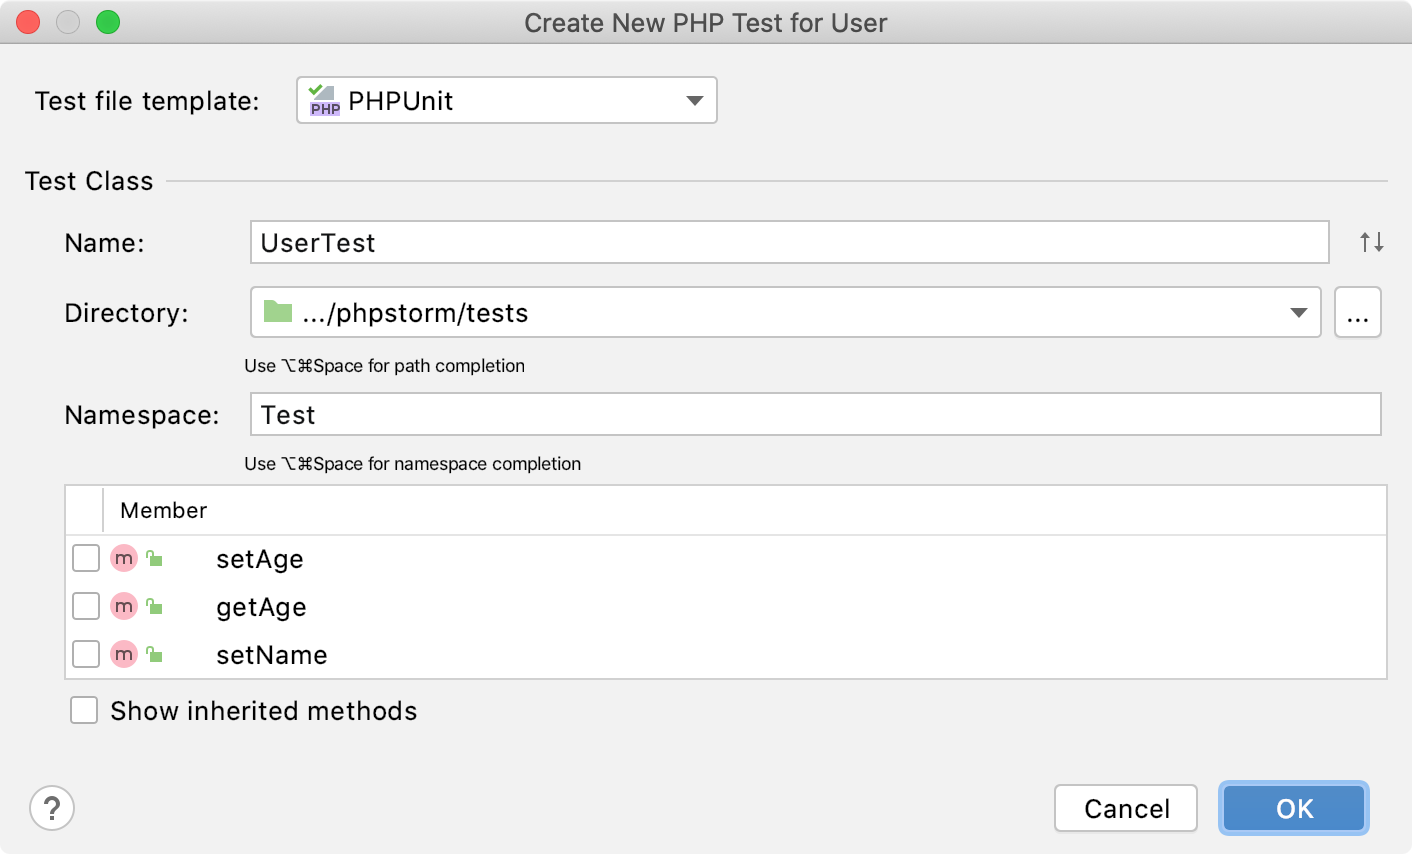 the Create new phpunit test dialog